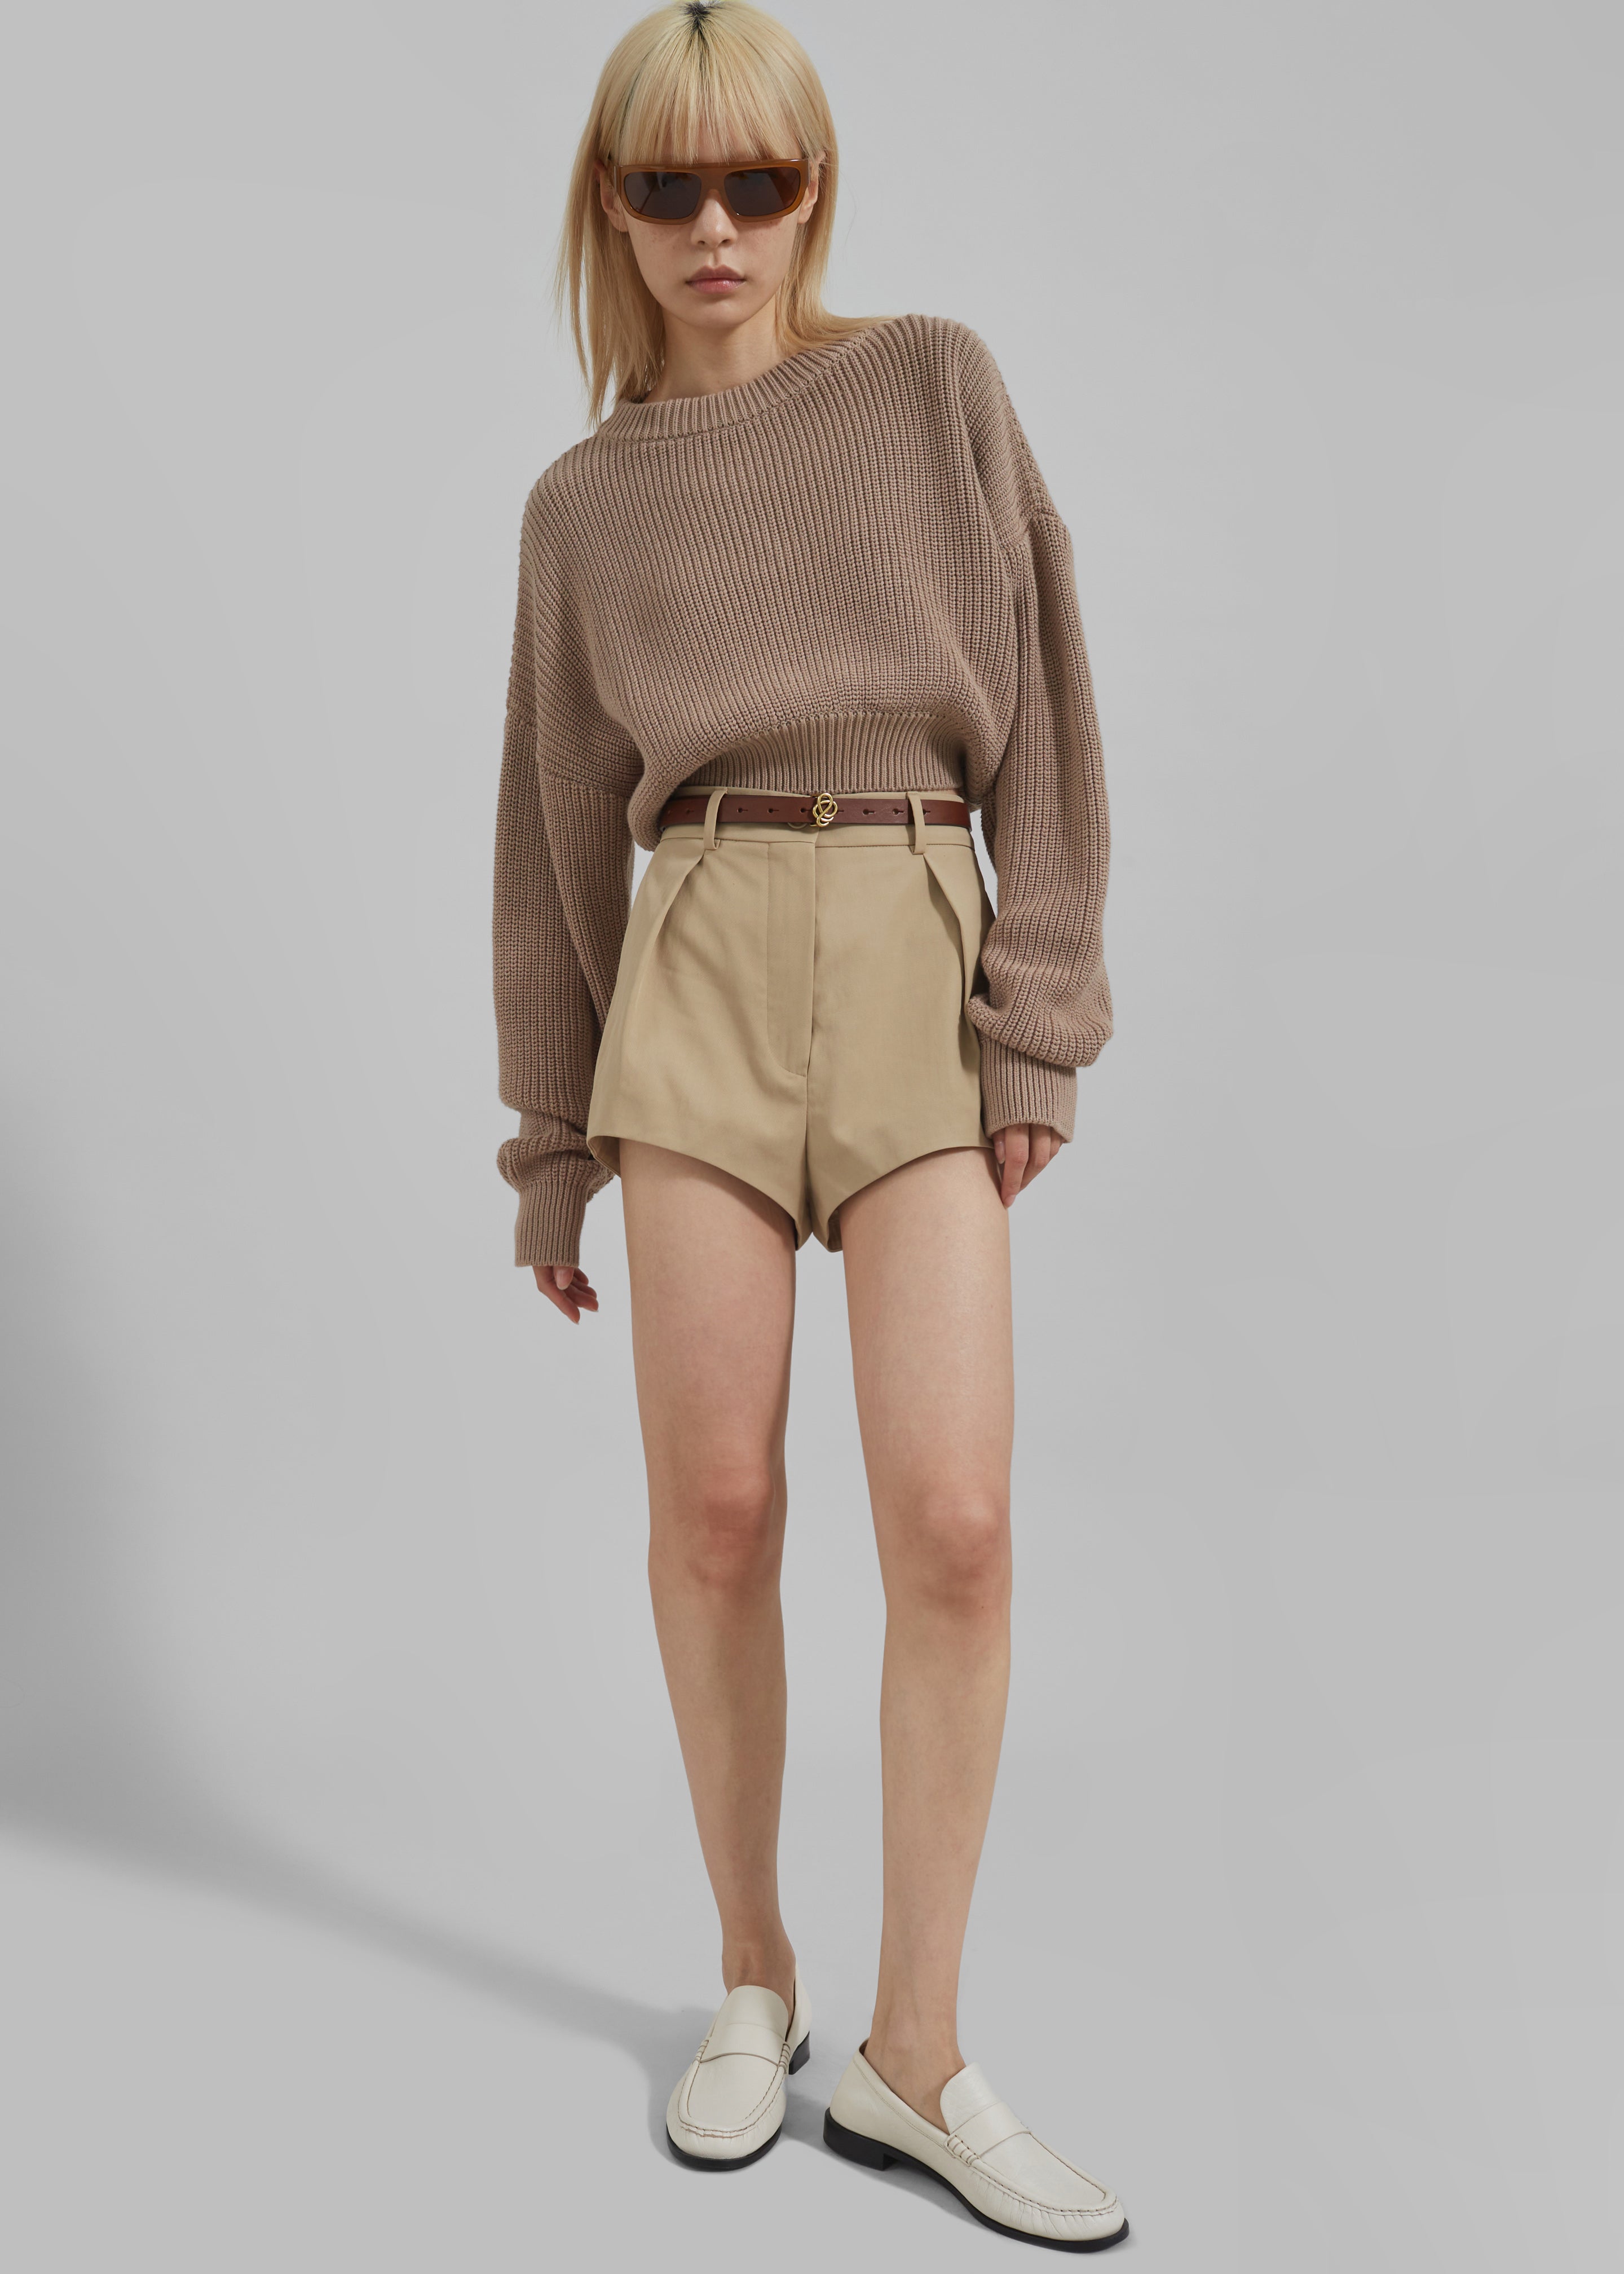 Teague Cropped Sweater - Beige - 1